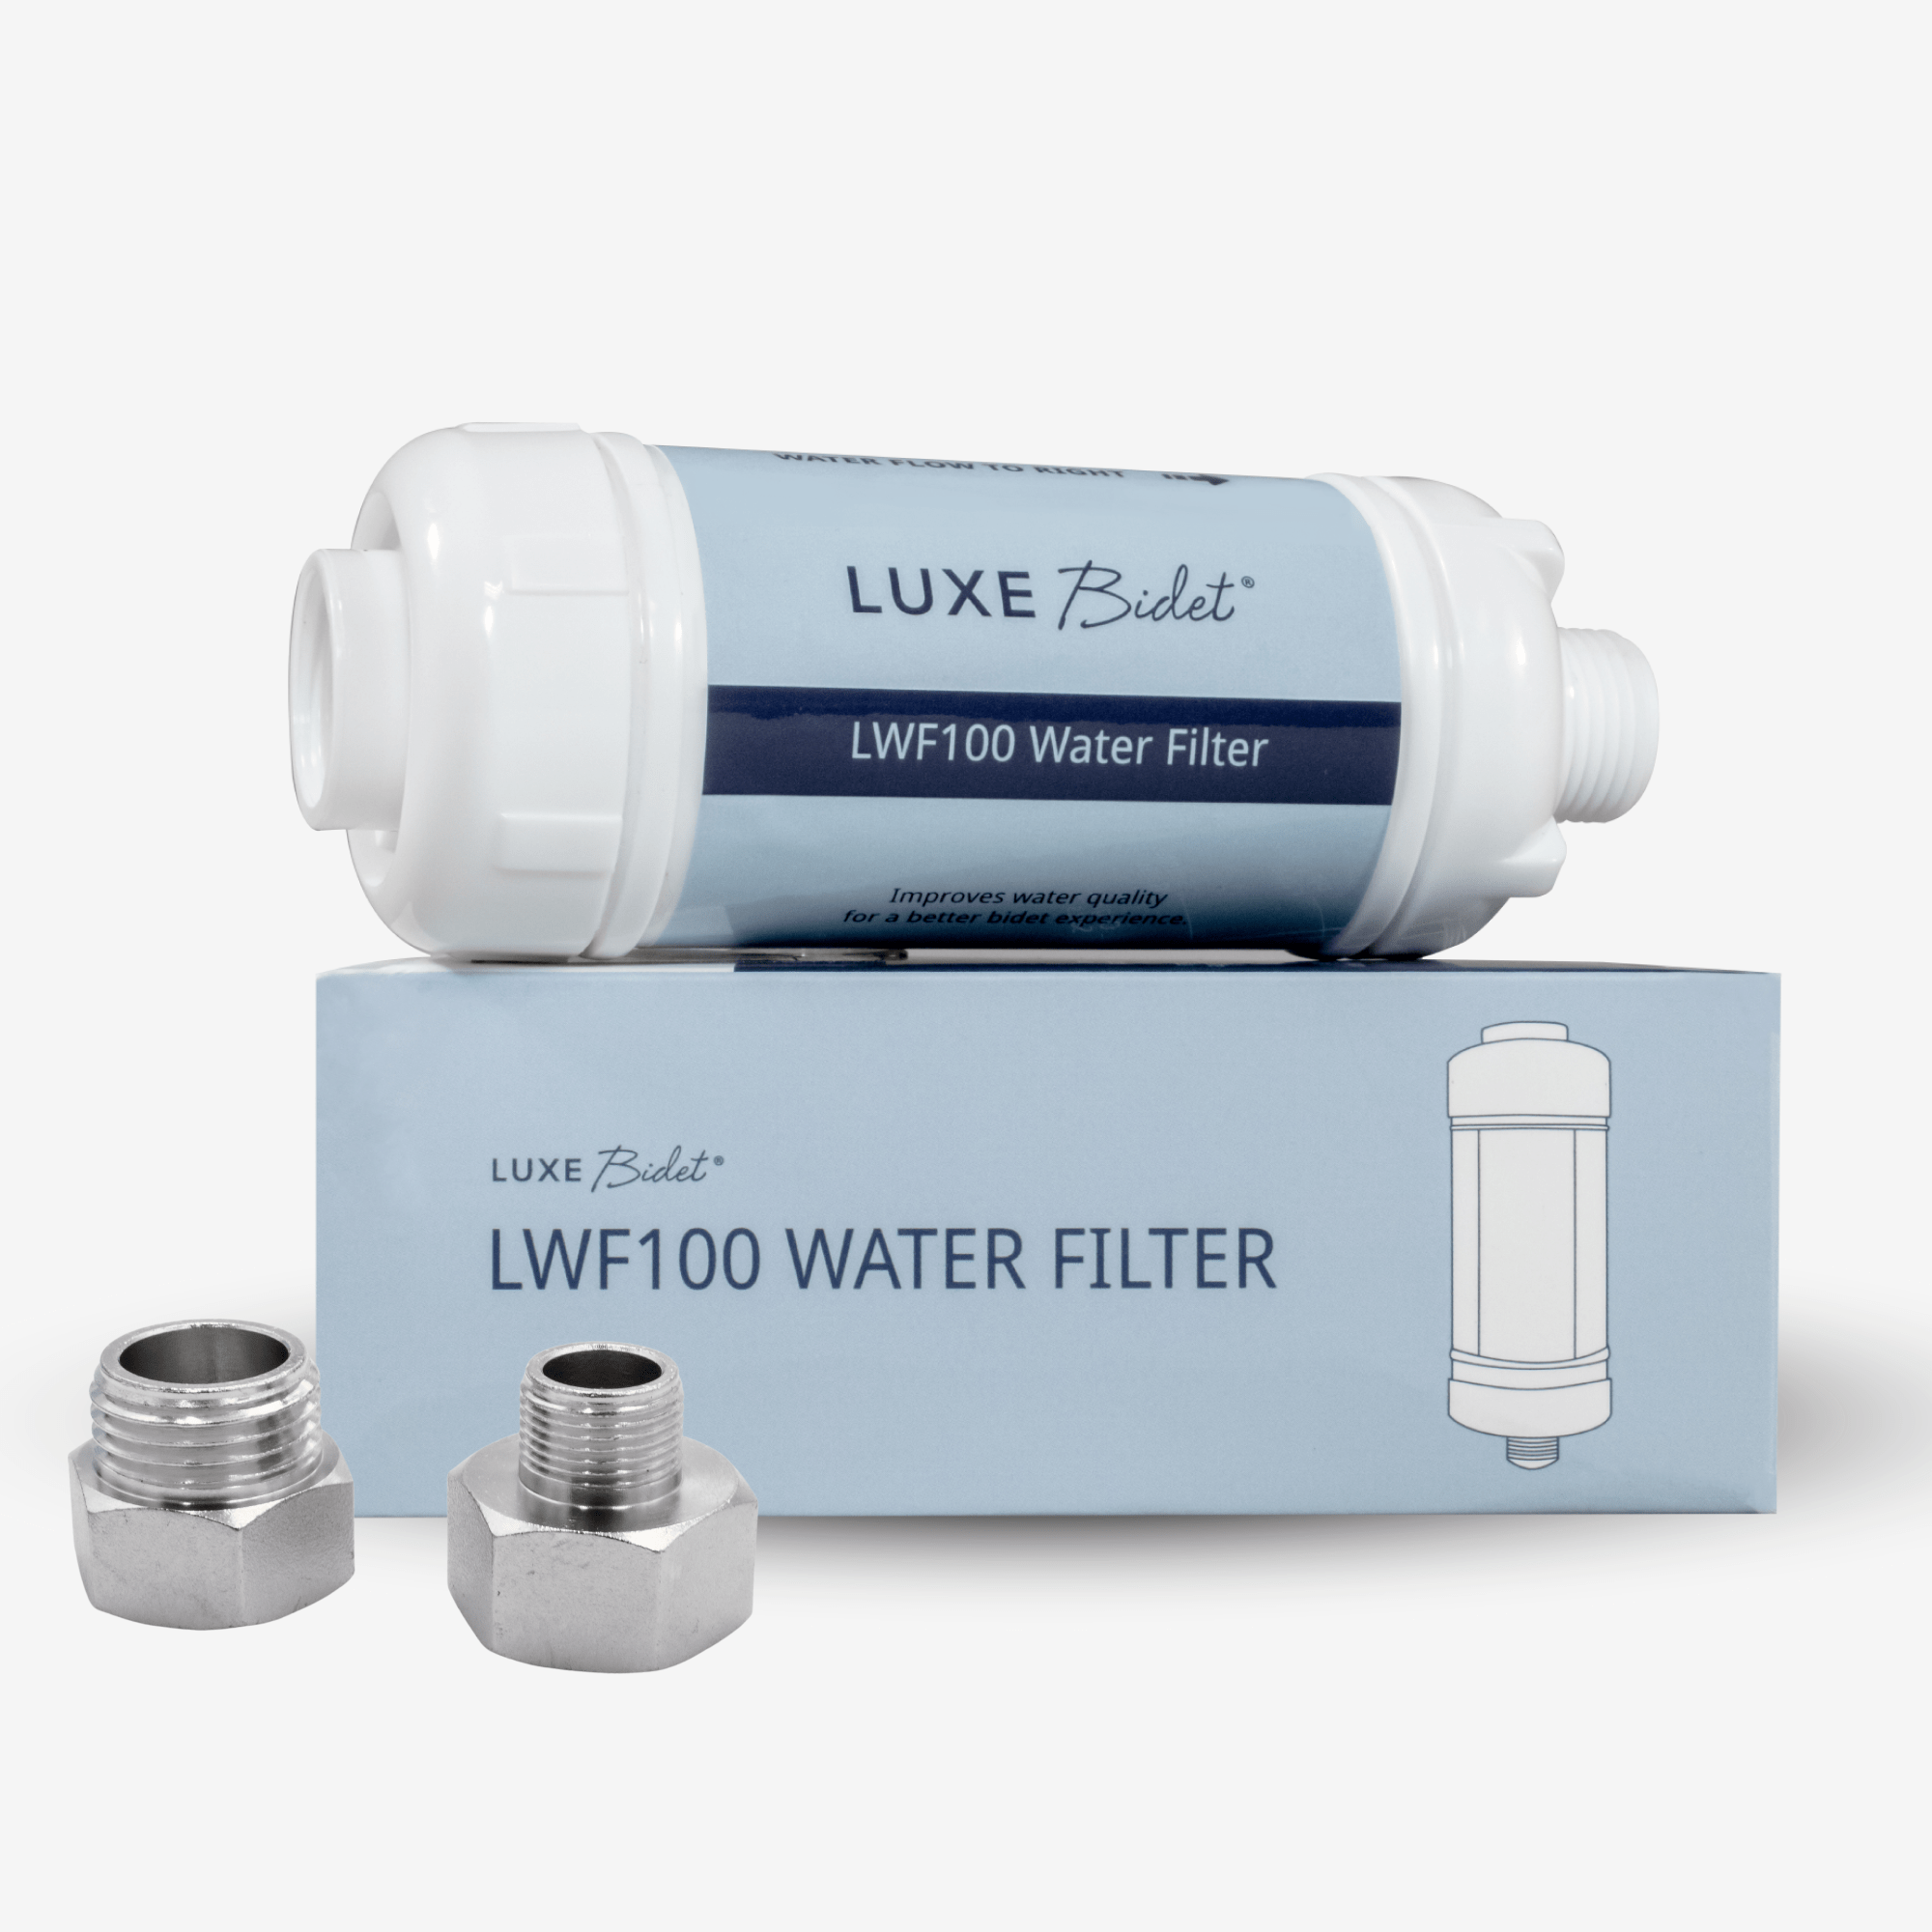 LUXE Bidet 4-in-1 Filtration Water Filter with 3/8